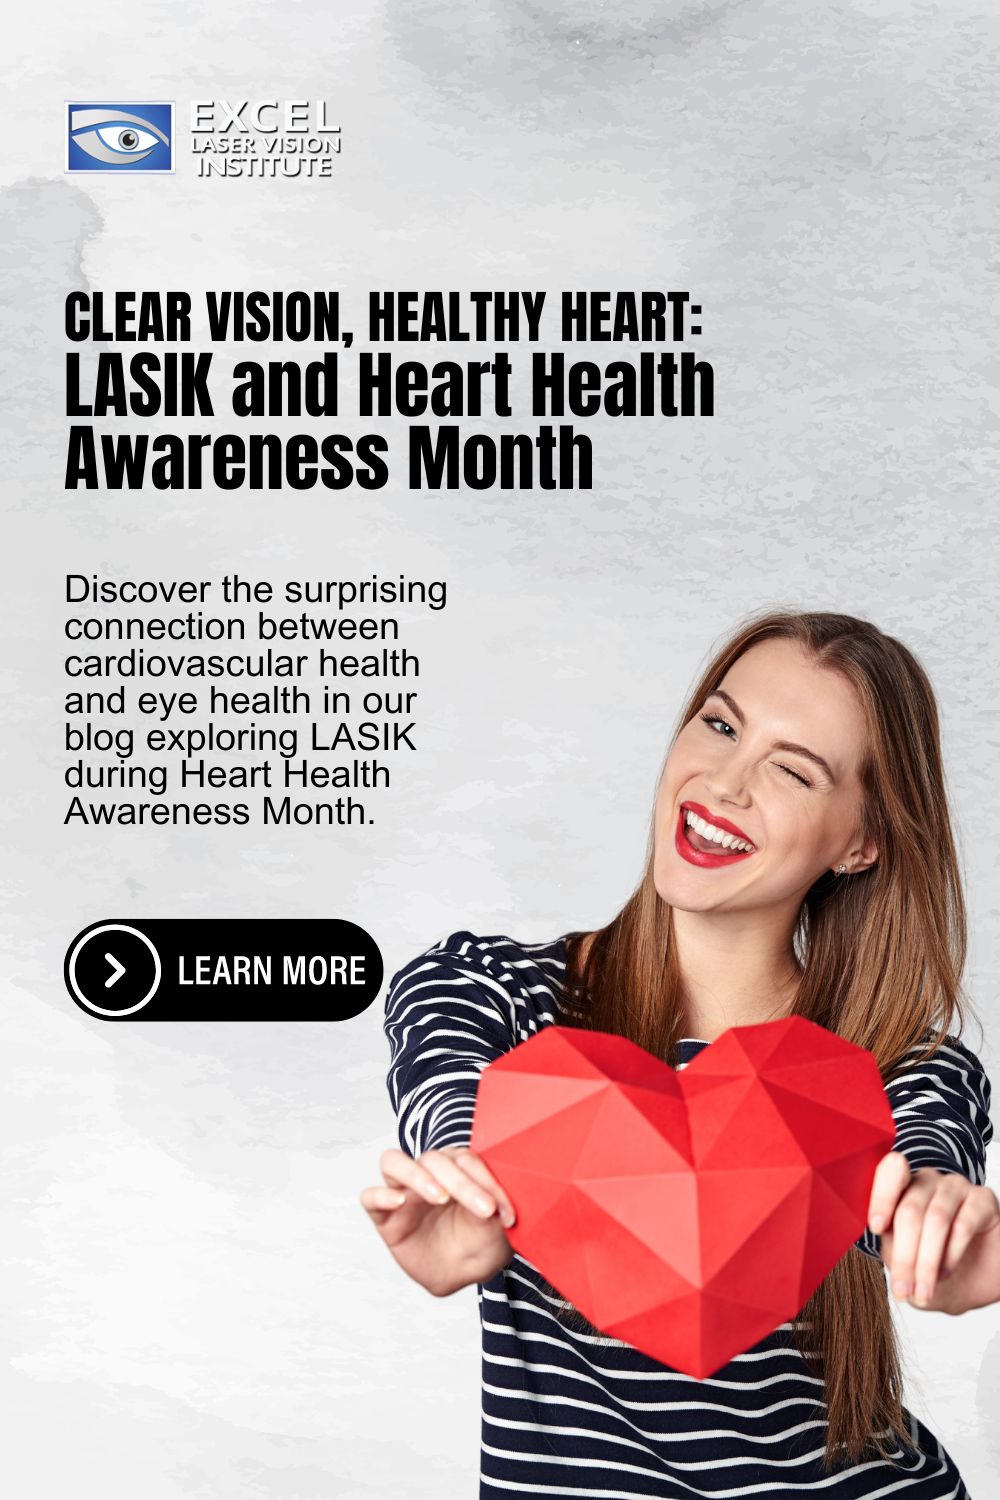 winking-woman-holding-a-heart-blog-title-Clear-Vision-Healthy-Heart-LASIK-and-Heart-Health-Awareness-Month-Pinterest-Pin